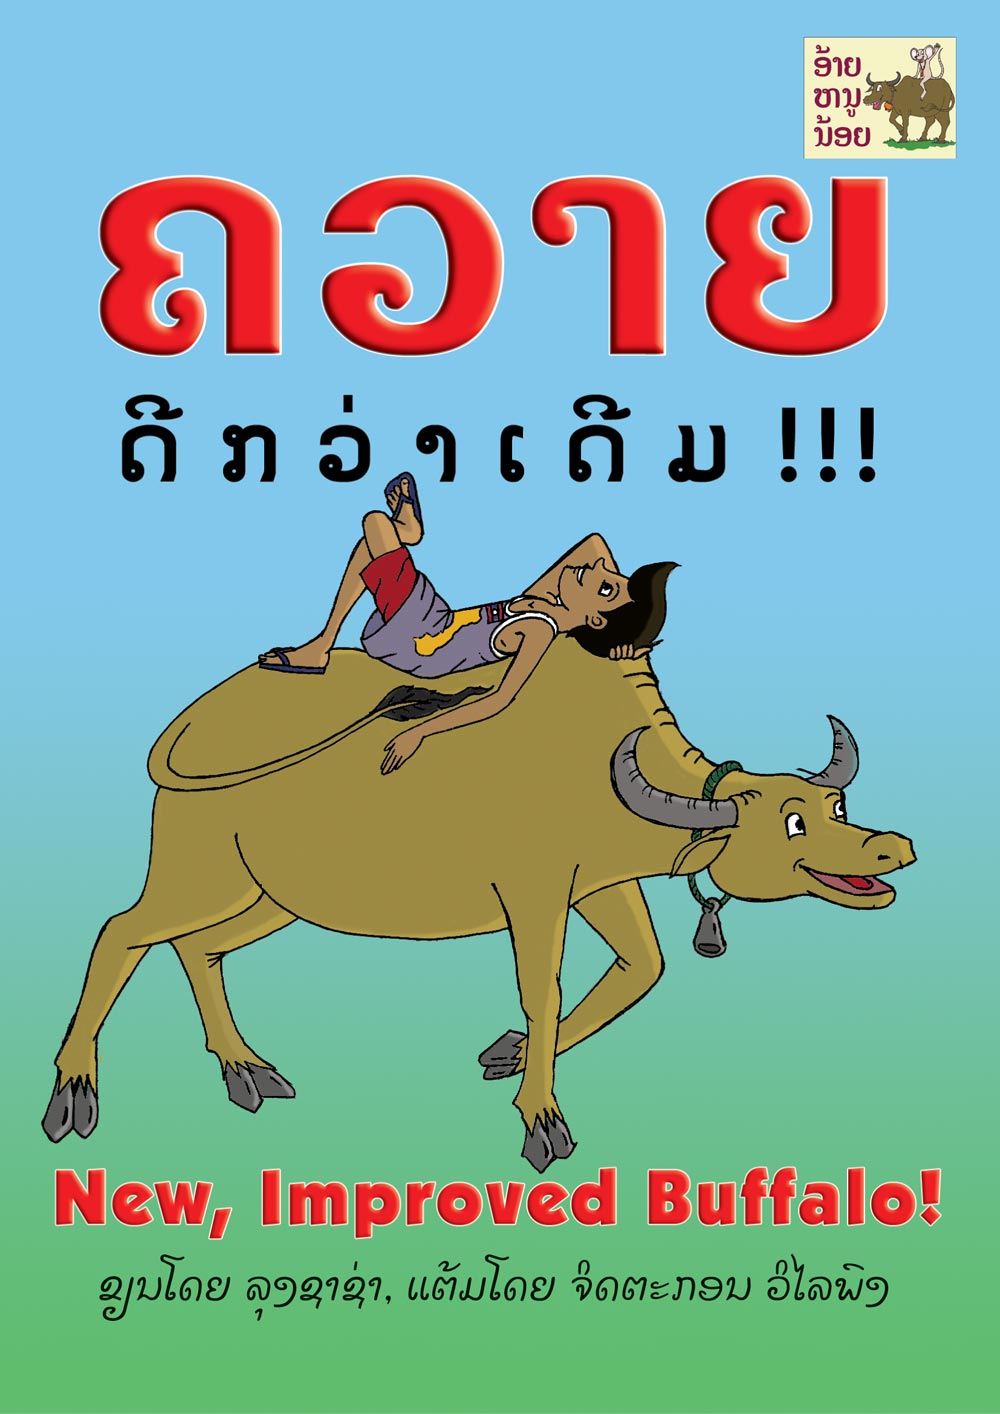 New, Improved Buffalo large book cover, published in Lao and English